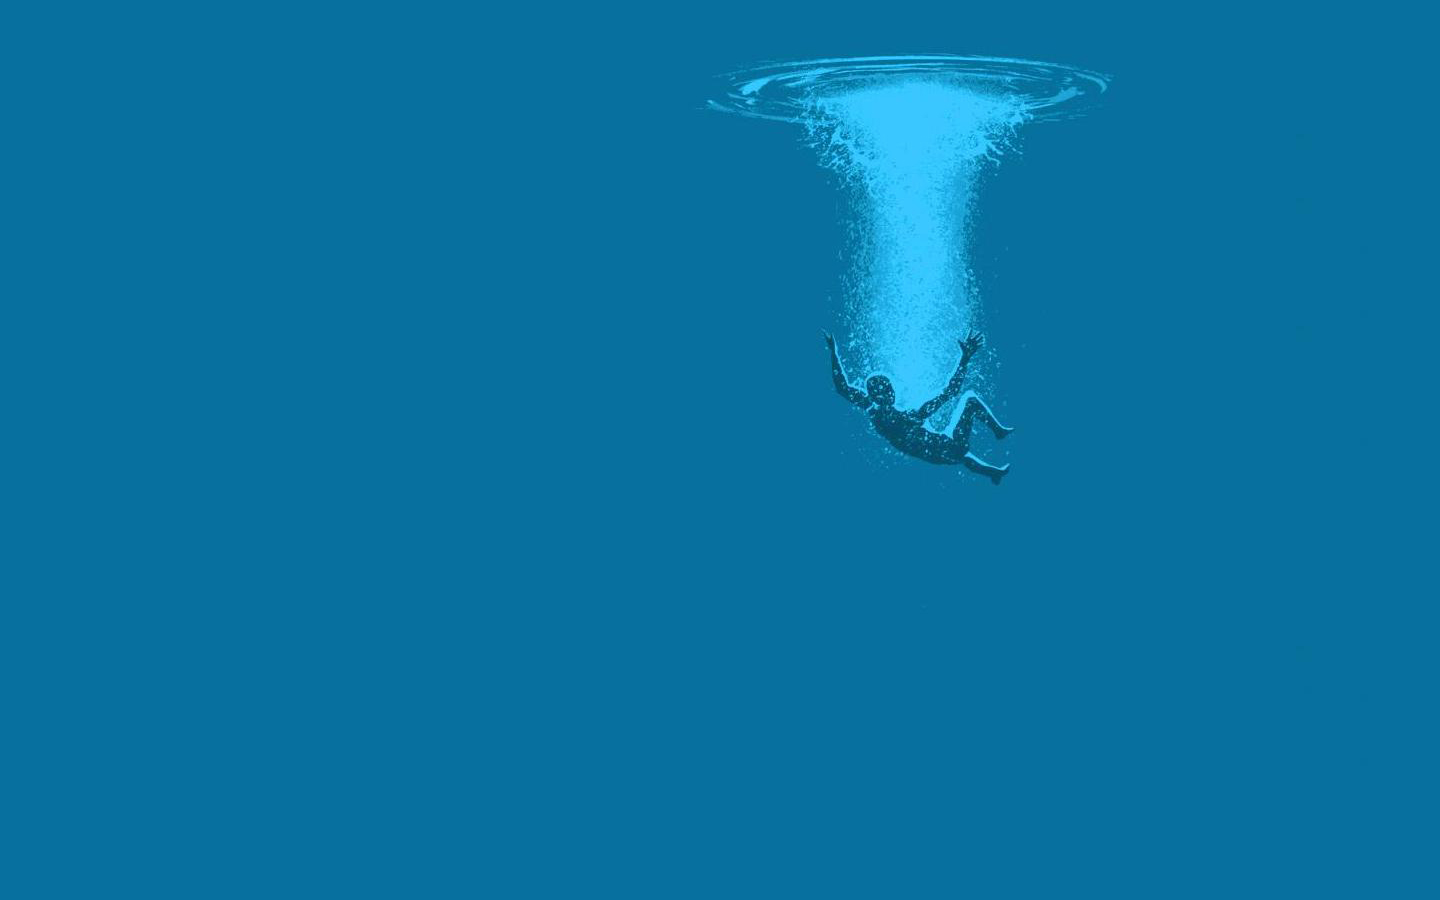 man falling into water Wallpaper Background 32933